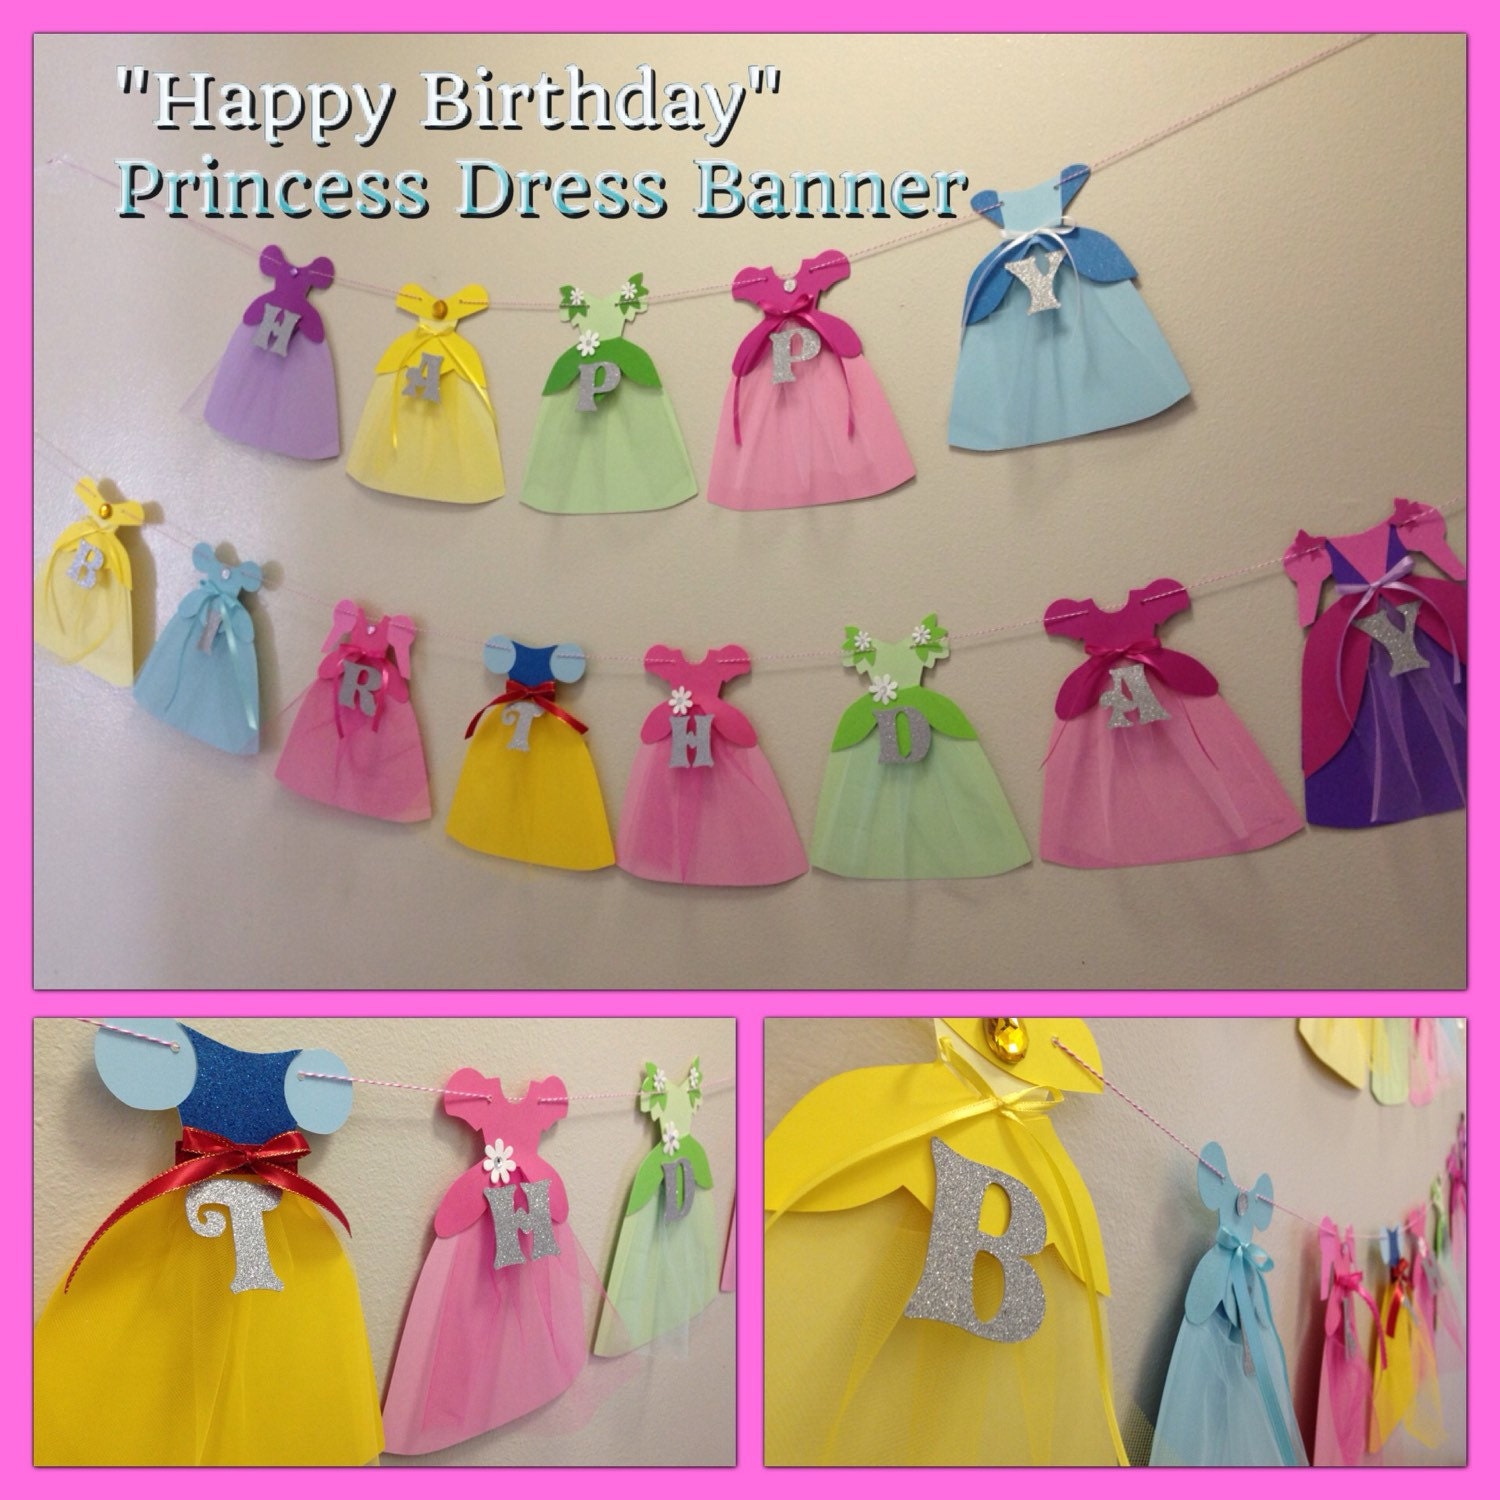 Download HAPPY BIRTHDAY Princess Dress Banner by Hdoodle on Etsy